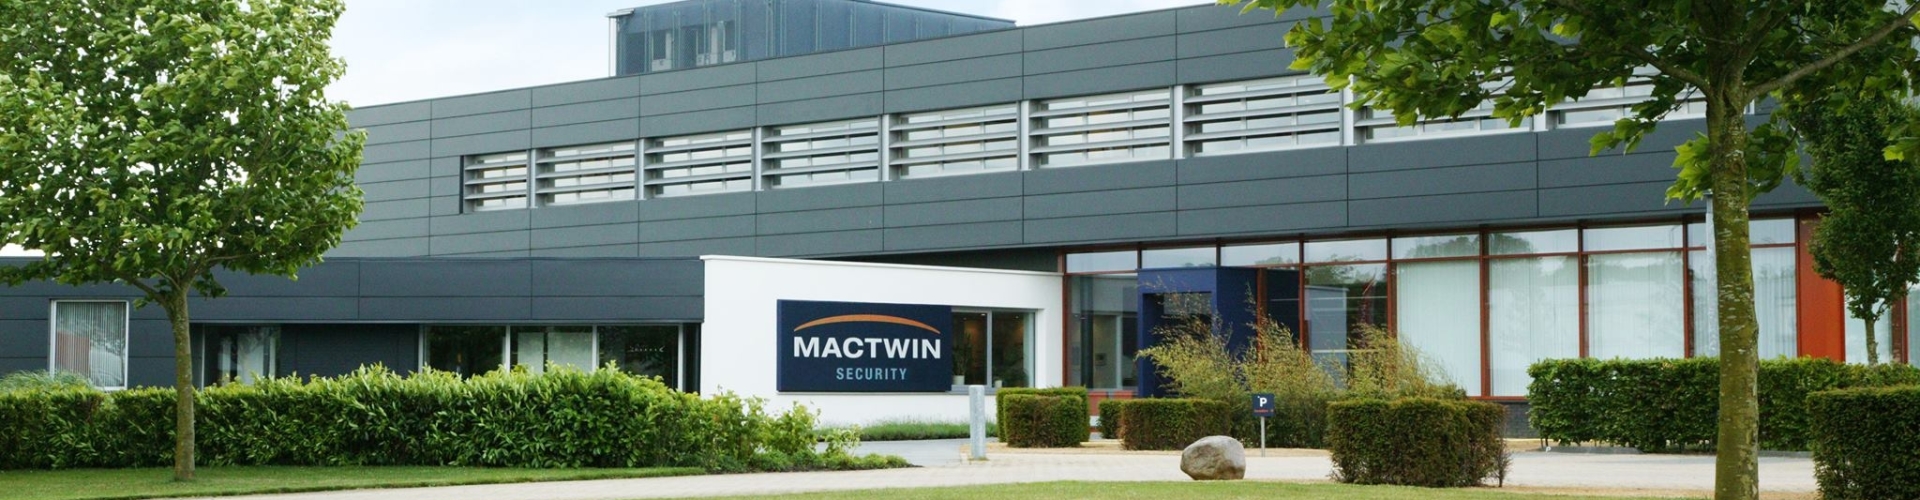 Accountmanager Integrated Security Vacature Mactwin Security